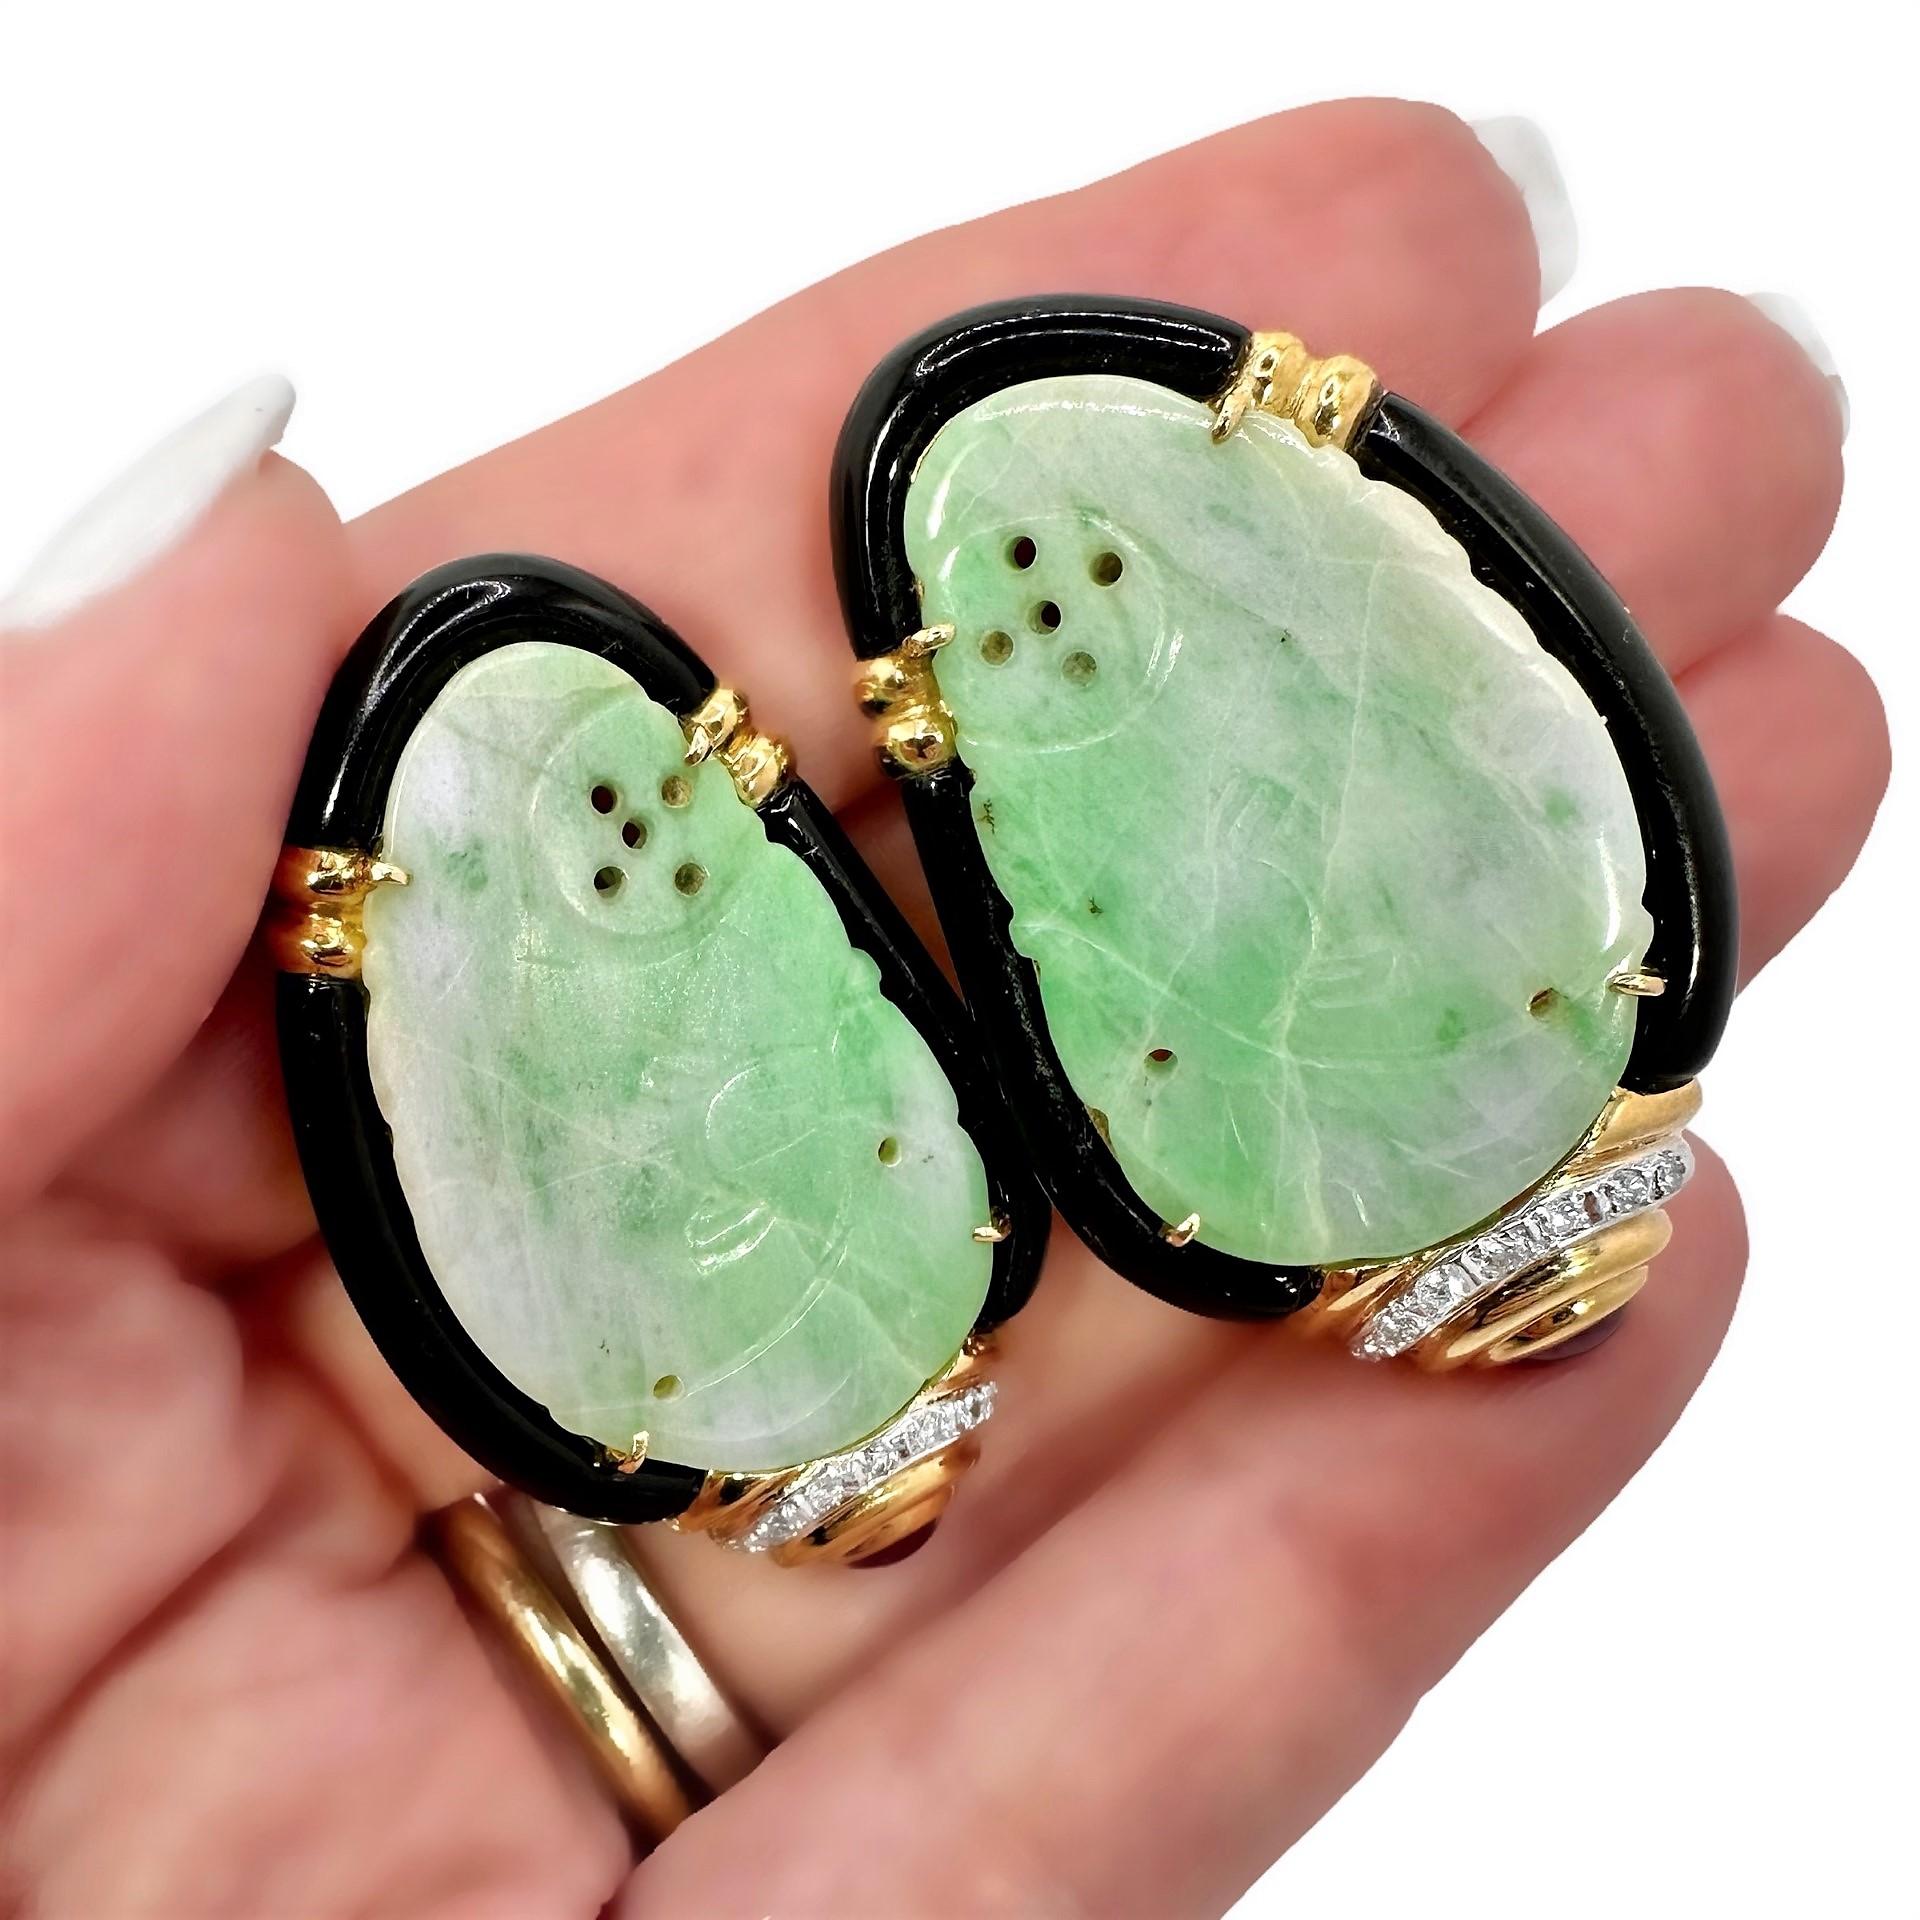 Women's Grand Scale 18k Yellow Gold, Jadeite Jade, Ruby, Diamond and Onyx Earrings For Sale